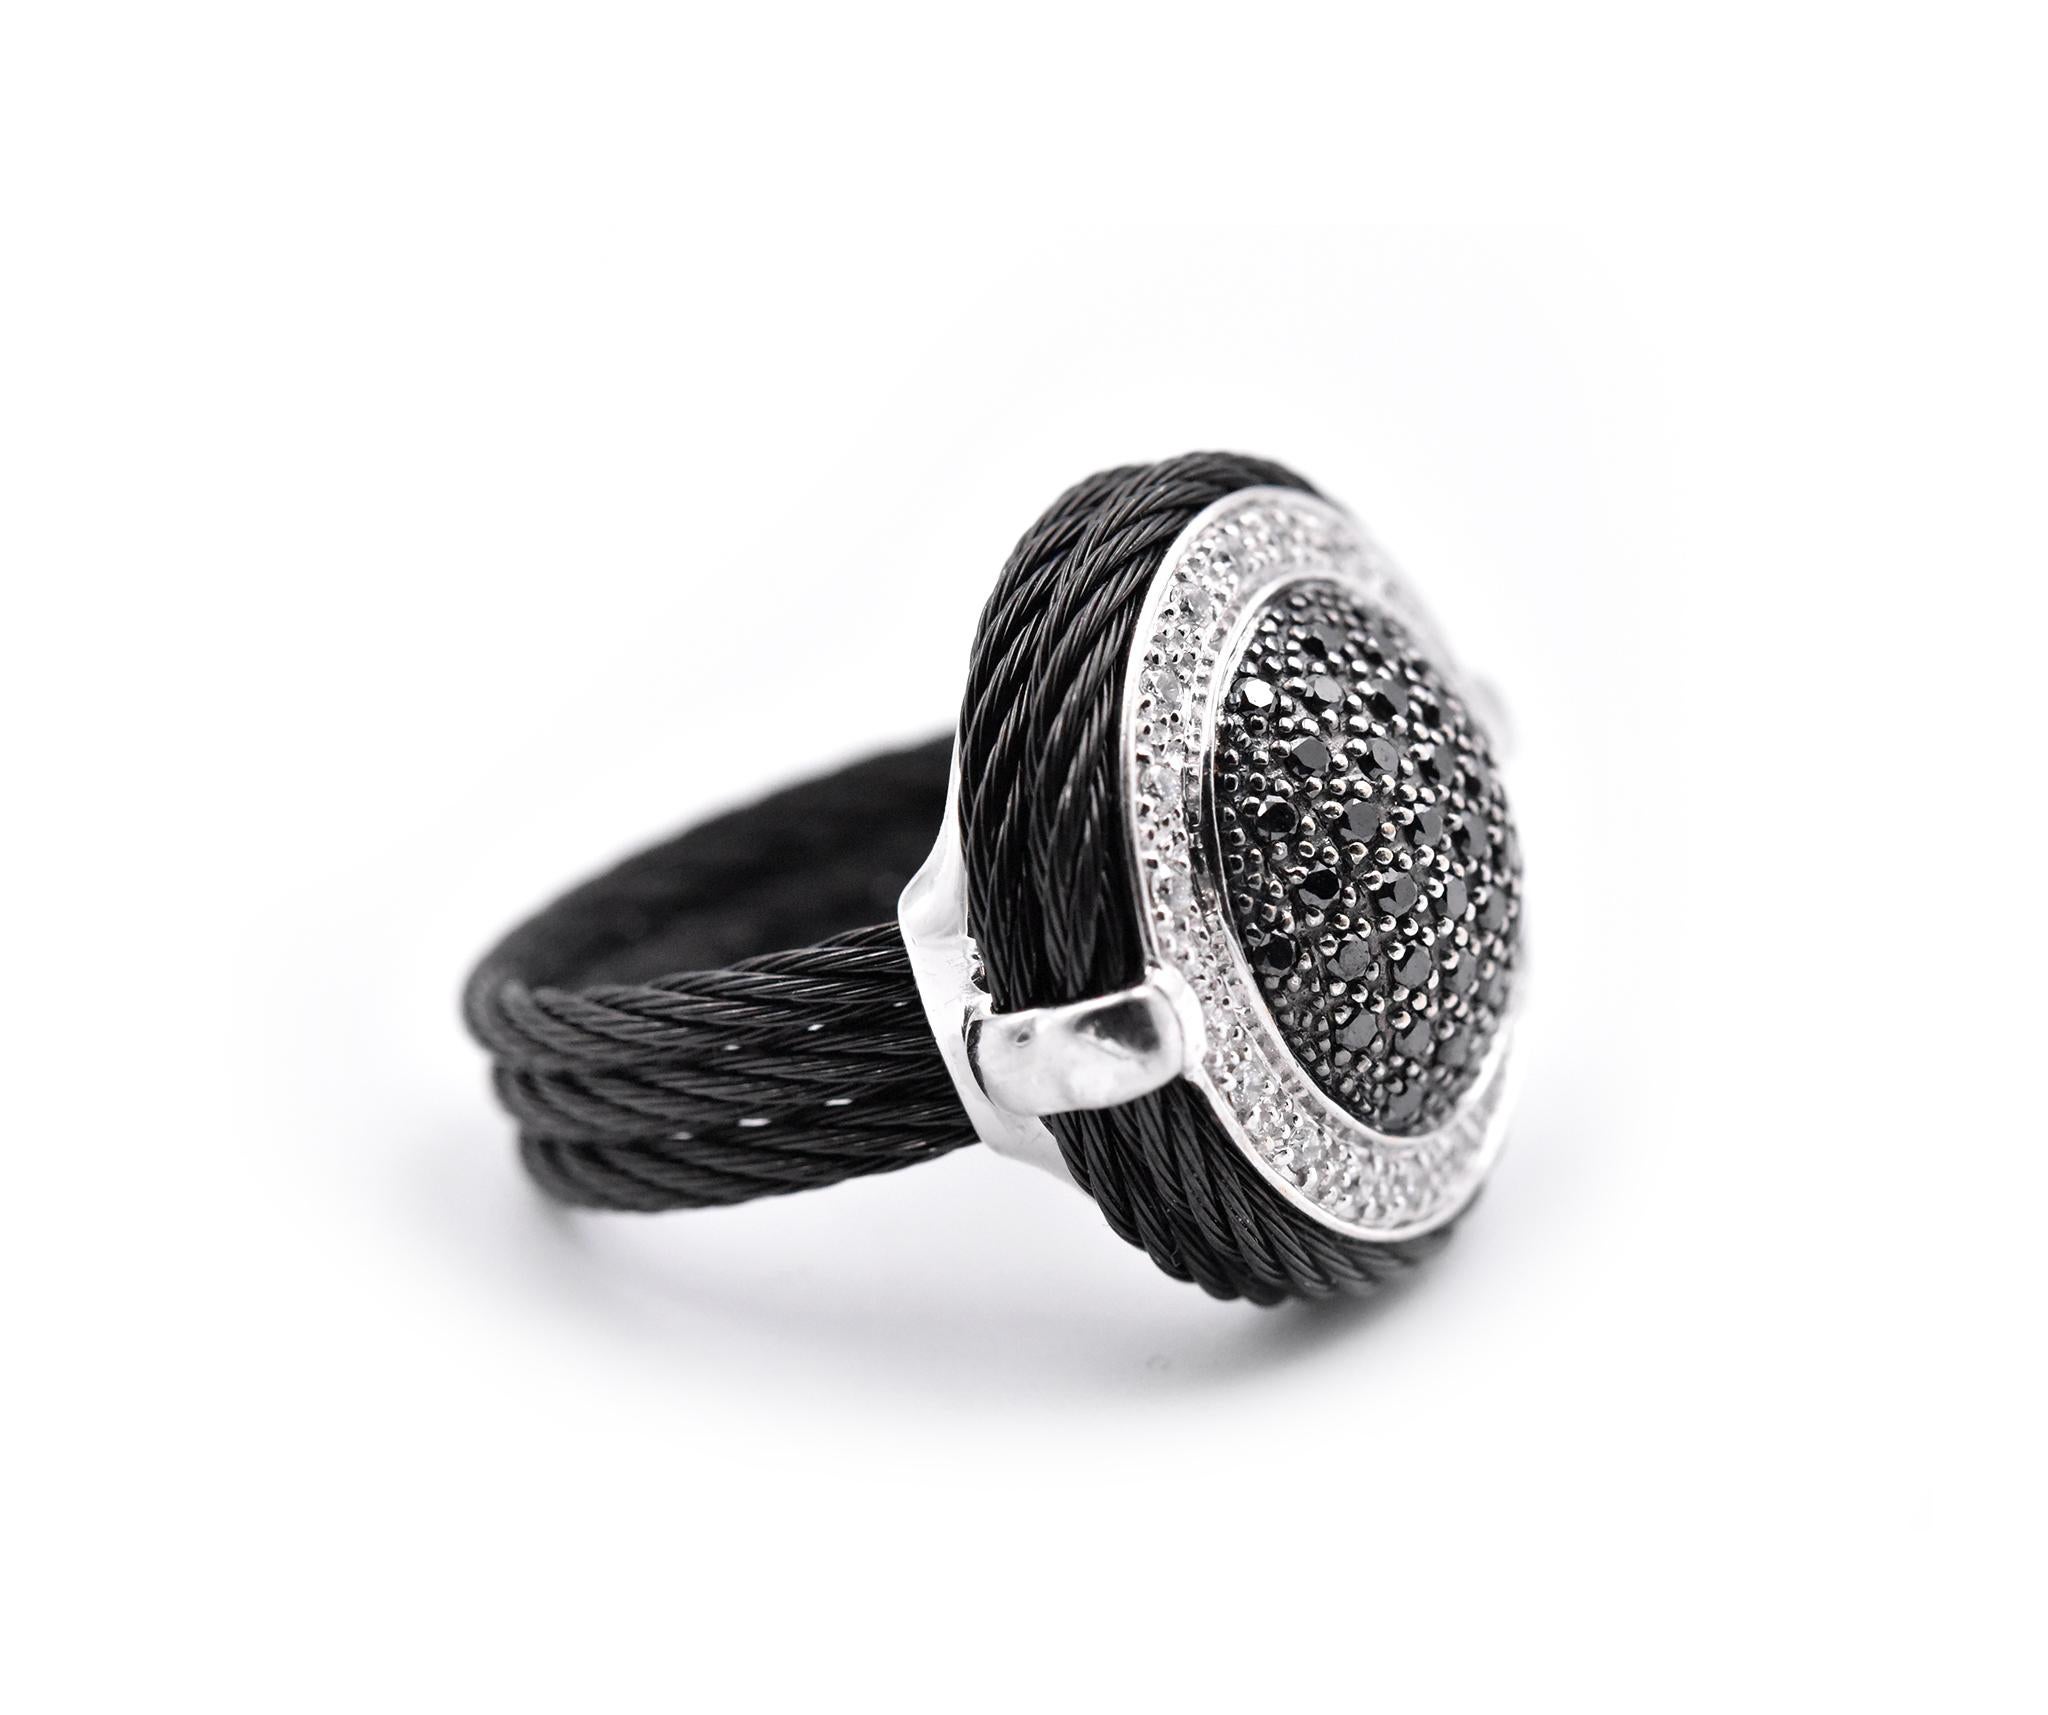 Designer: Alor Noir
Material: 18k white gold and stainless steel
White Diamonds: 18 round brilliant cuts = 0.16cttw
Black Diamonds: 43 round brilliant cuts = 0.42cttw
Ring Size: 7 ¼ (ring cannot be sized)
Dimensions: ring top measures 22mm in